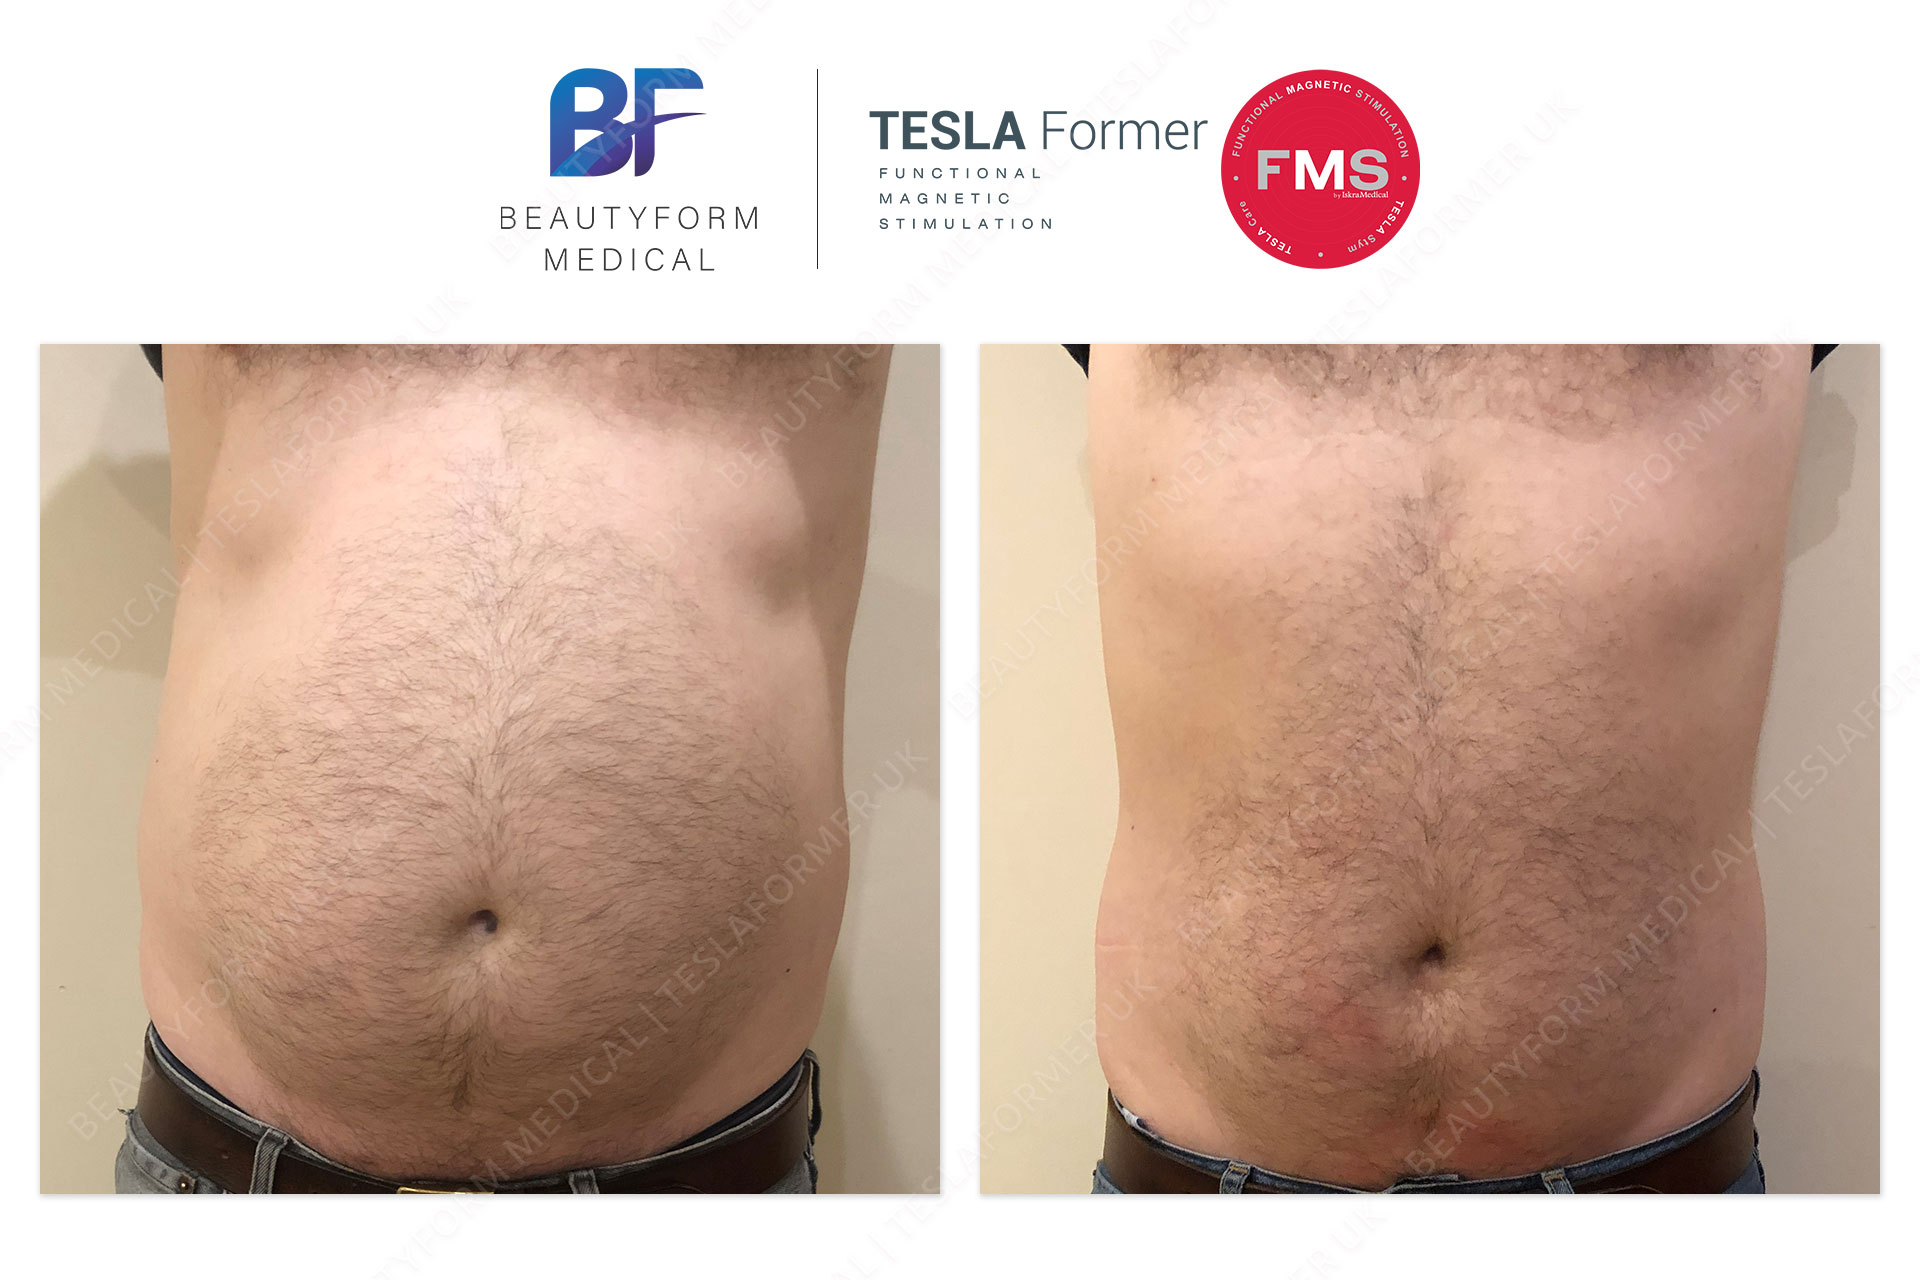 Tesla Former Abs muscle stimulation before and after